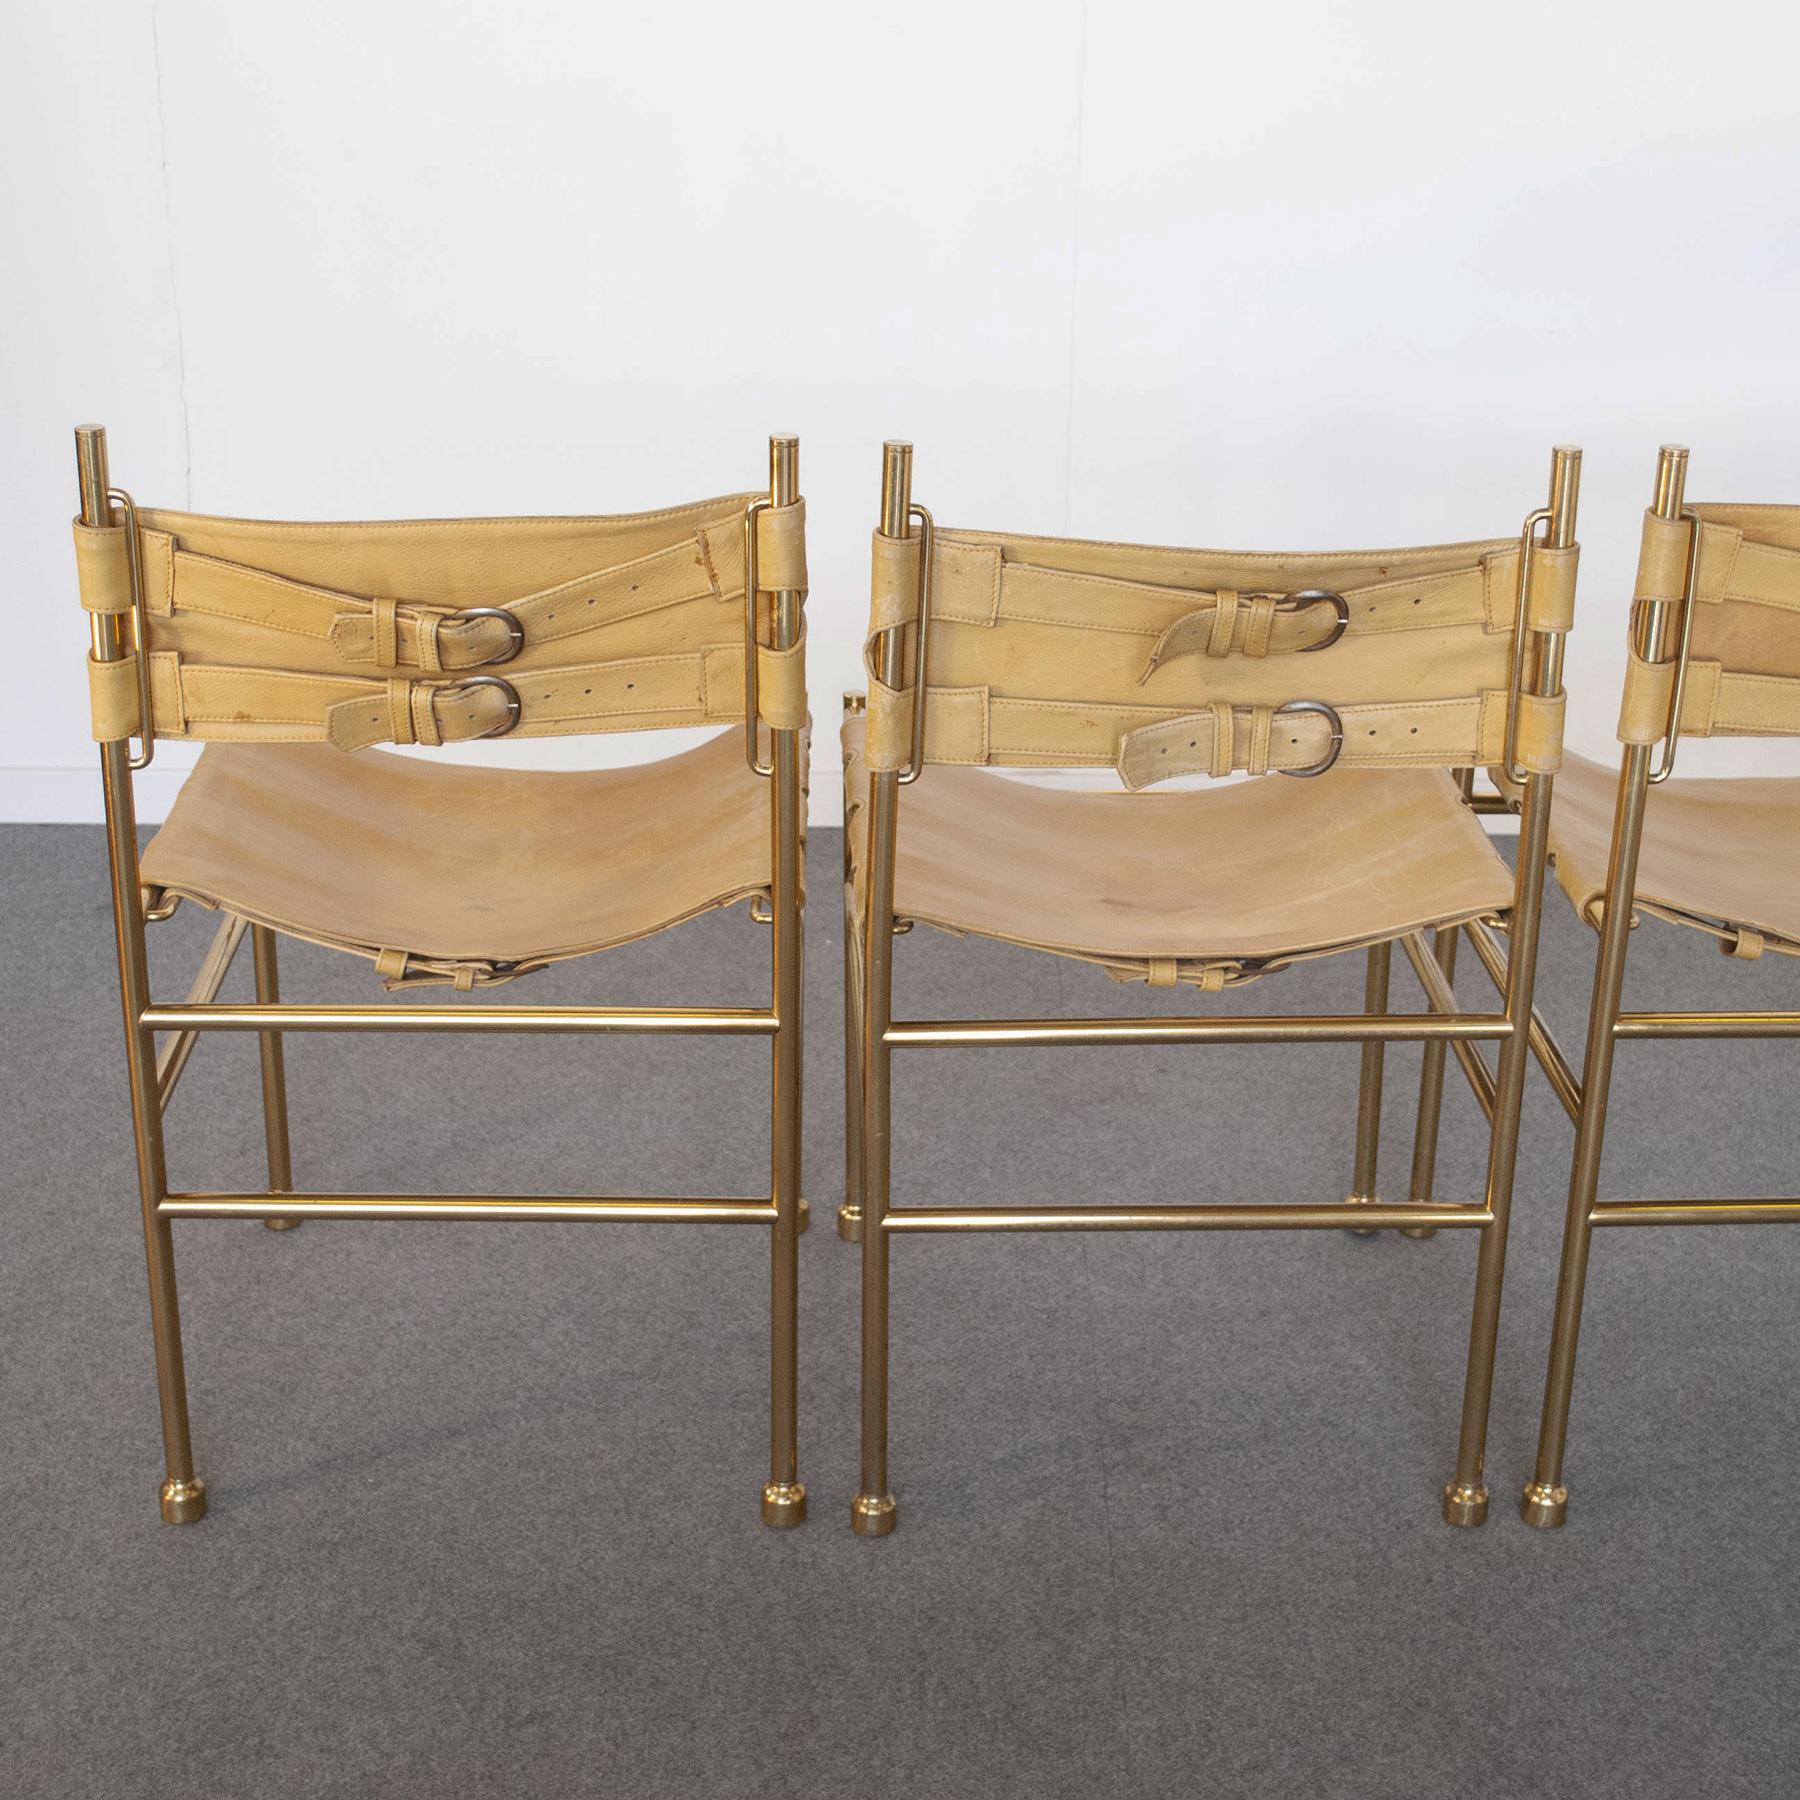 Brass Luciano Frigerio Chairs by Desio from the 70s